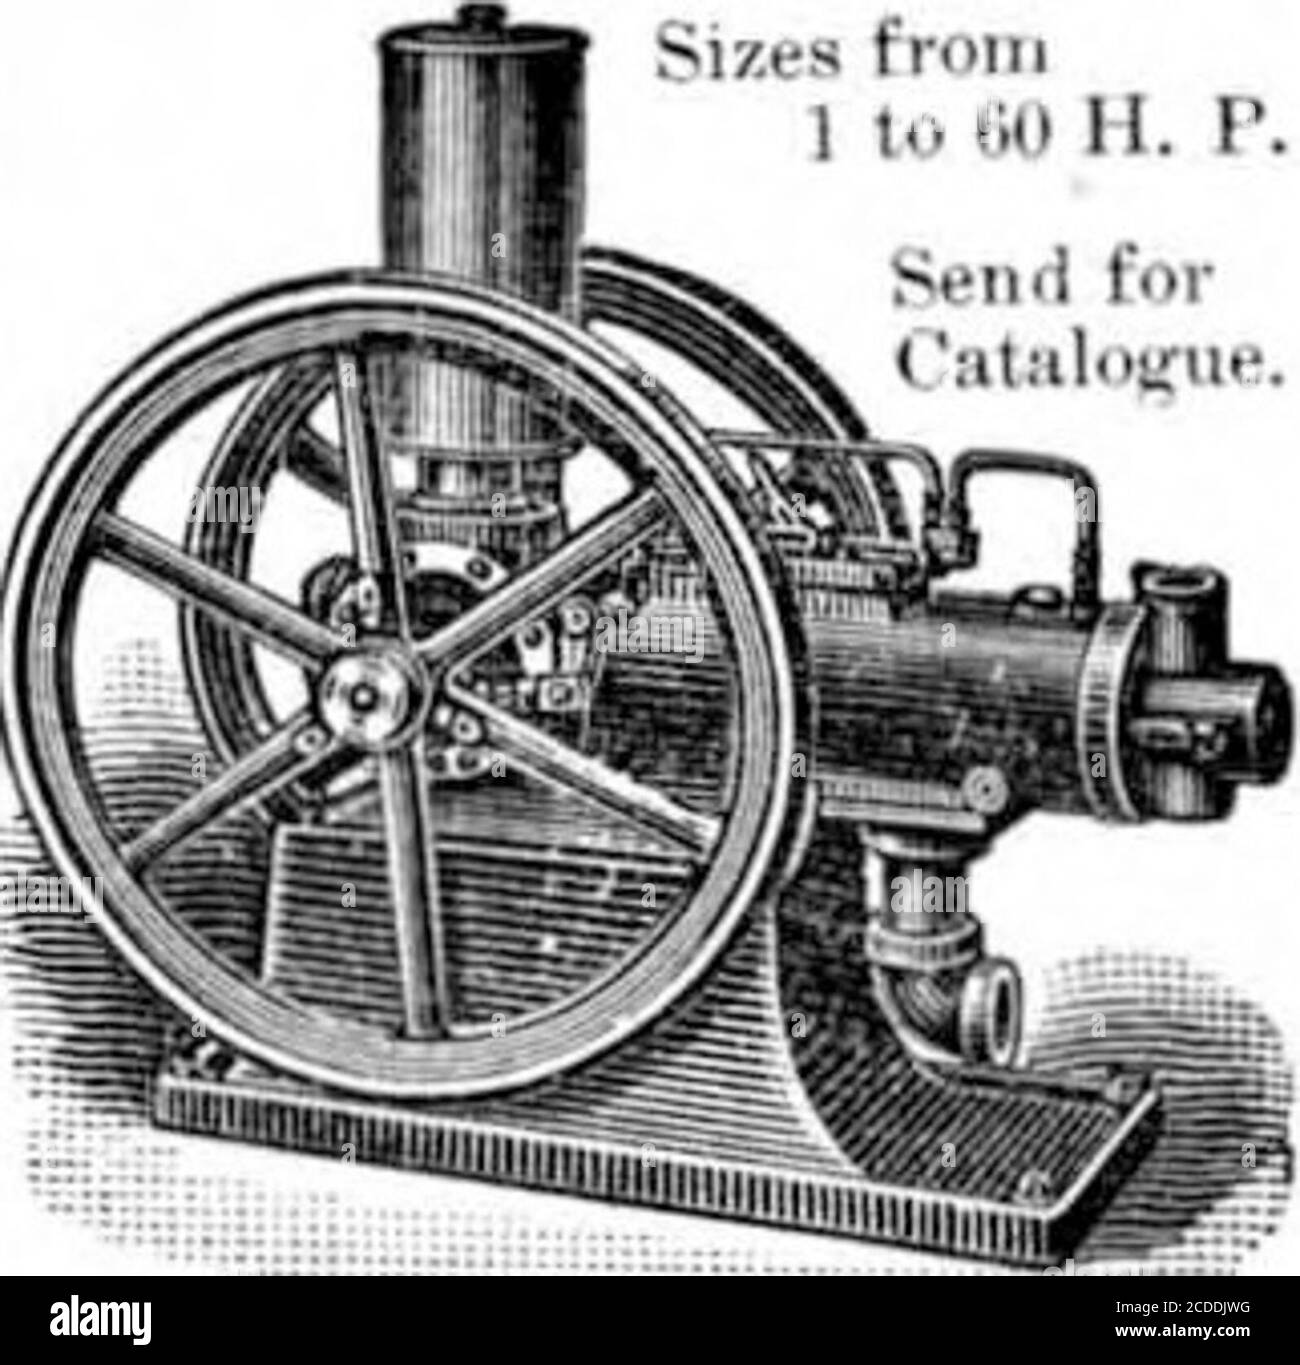 . Scientific American Volume 86 Number 14 (April 1902) . FOR TOWN OR COUNTRY USE There is no more st-rvk-eabli- or simpleengine th.nn the WEBER JIMOKa -.X H. I- engine suitable for grindingfeed, [lumping water, shelling eorn,&.c, or for running fans, presses,churus, butchers niachiuery,shearing machines. eU:. Completewith water and gasoline binks andpipes. Oilers, etc.. all ready forhusiness, He.ivy balance wheels.One operating valve. ii&gt; lbs.Weber (In* A. Gut*ollne Enirfne Co.Box 1111 a, Kansas City, Mo. o* 3C ^0^^ ^mmv^w«^^m THE MIETZ & WEISS from1 to SO H. Send forCatalogue. KEROSENE an Stock Photo